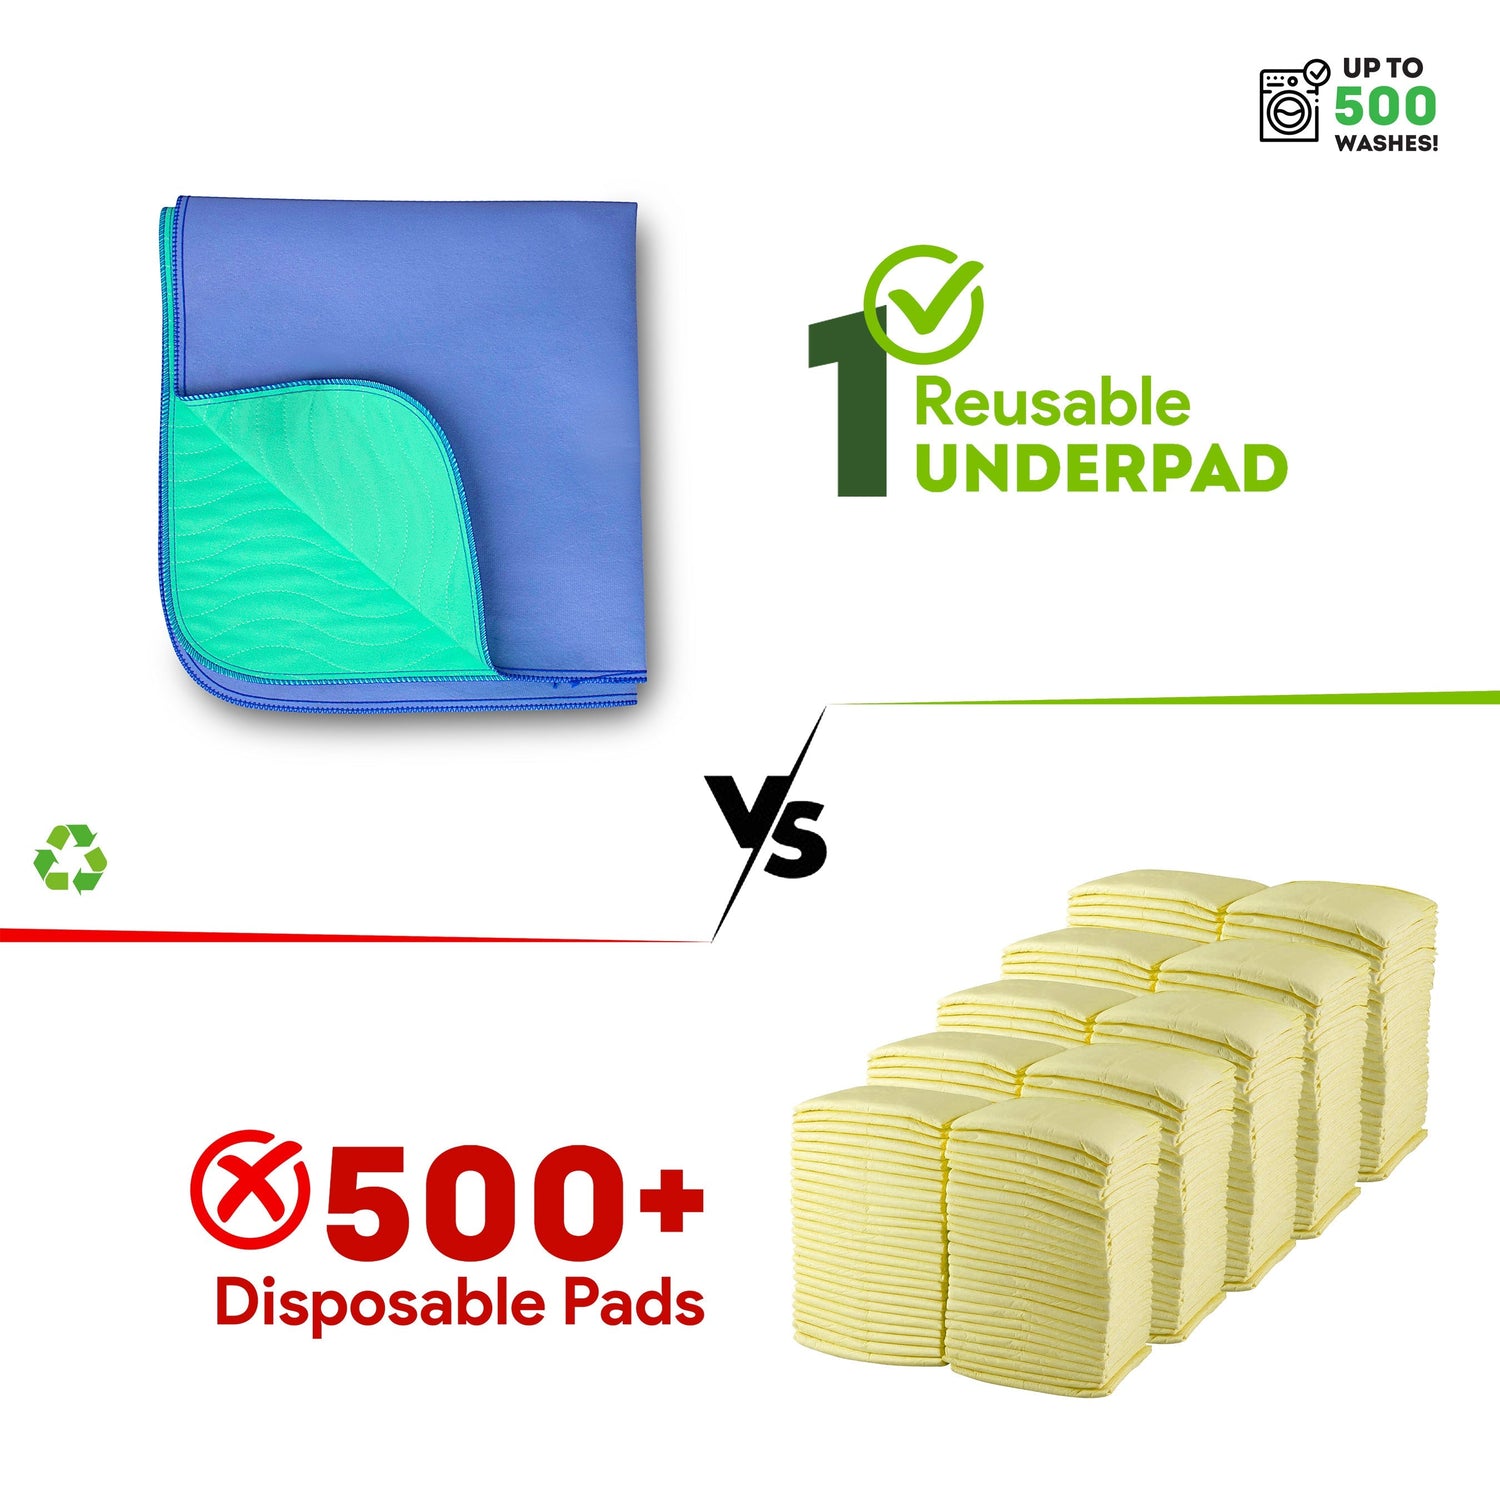 Improvia Washable Underpads, 34 x 36 (Sets of 2) - Heavy Absorbency Reusable Bedwetting Incontinence Pads - Blue, 2 Pack